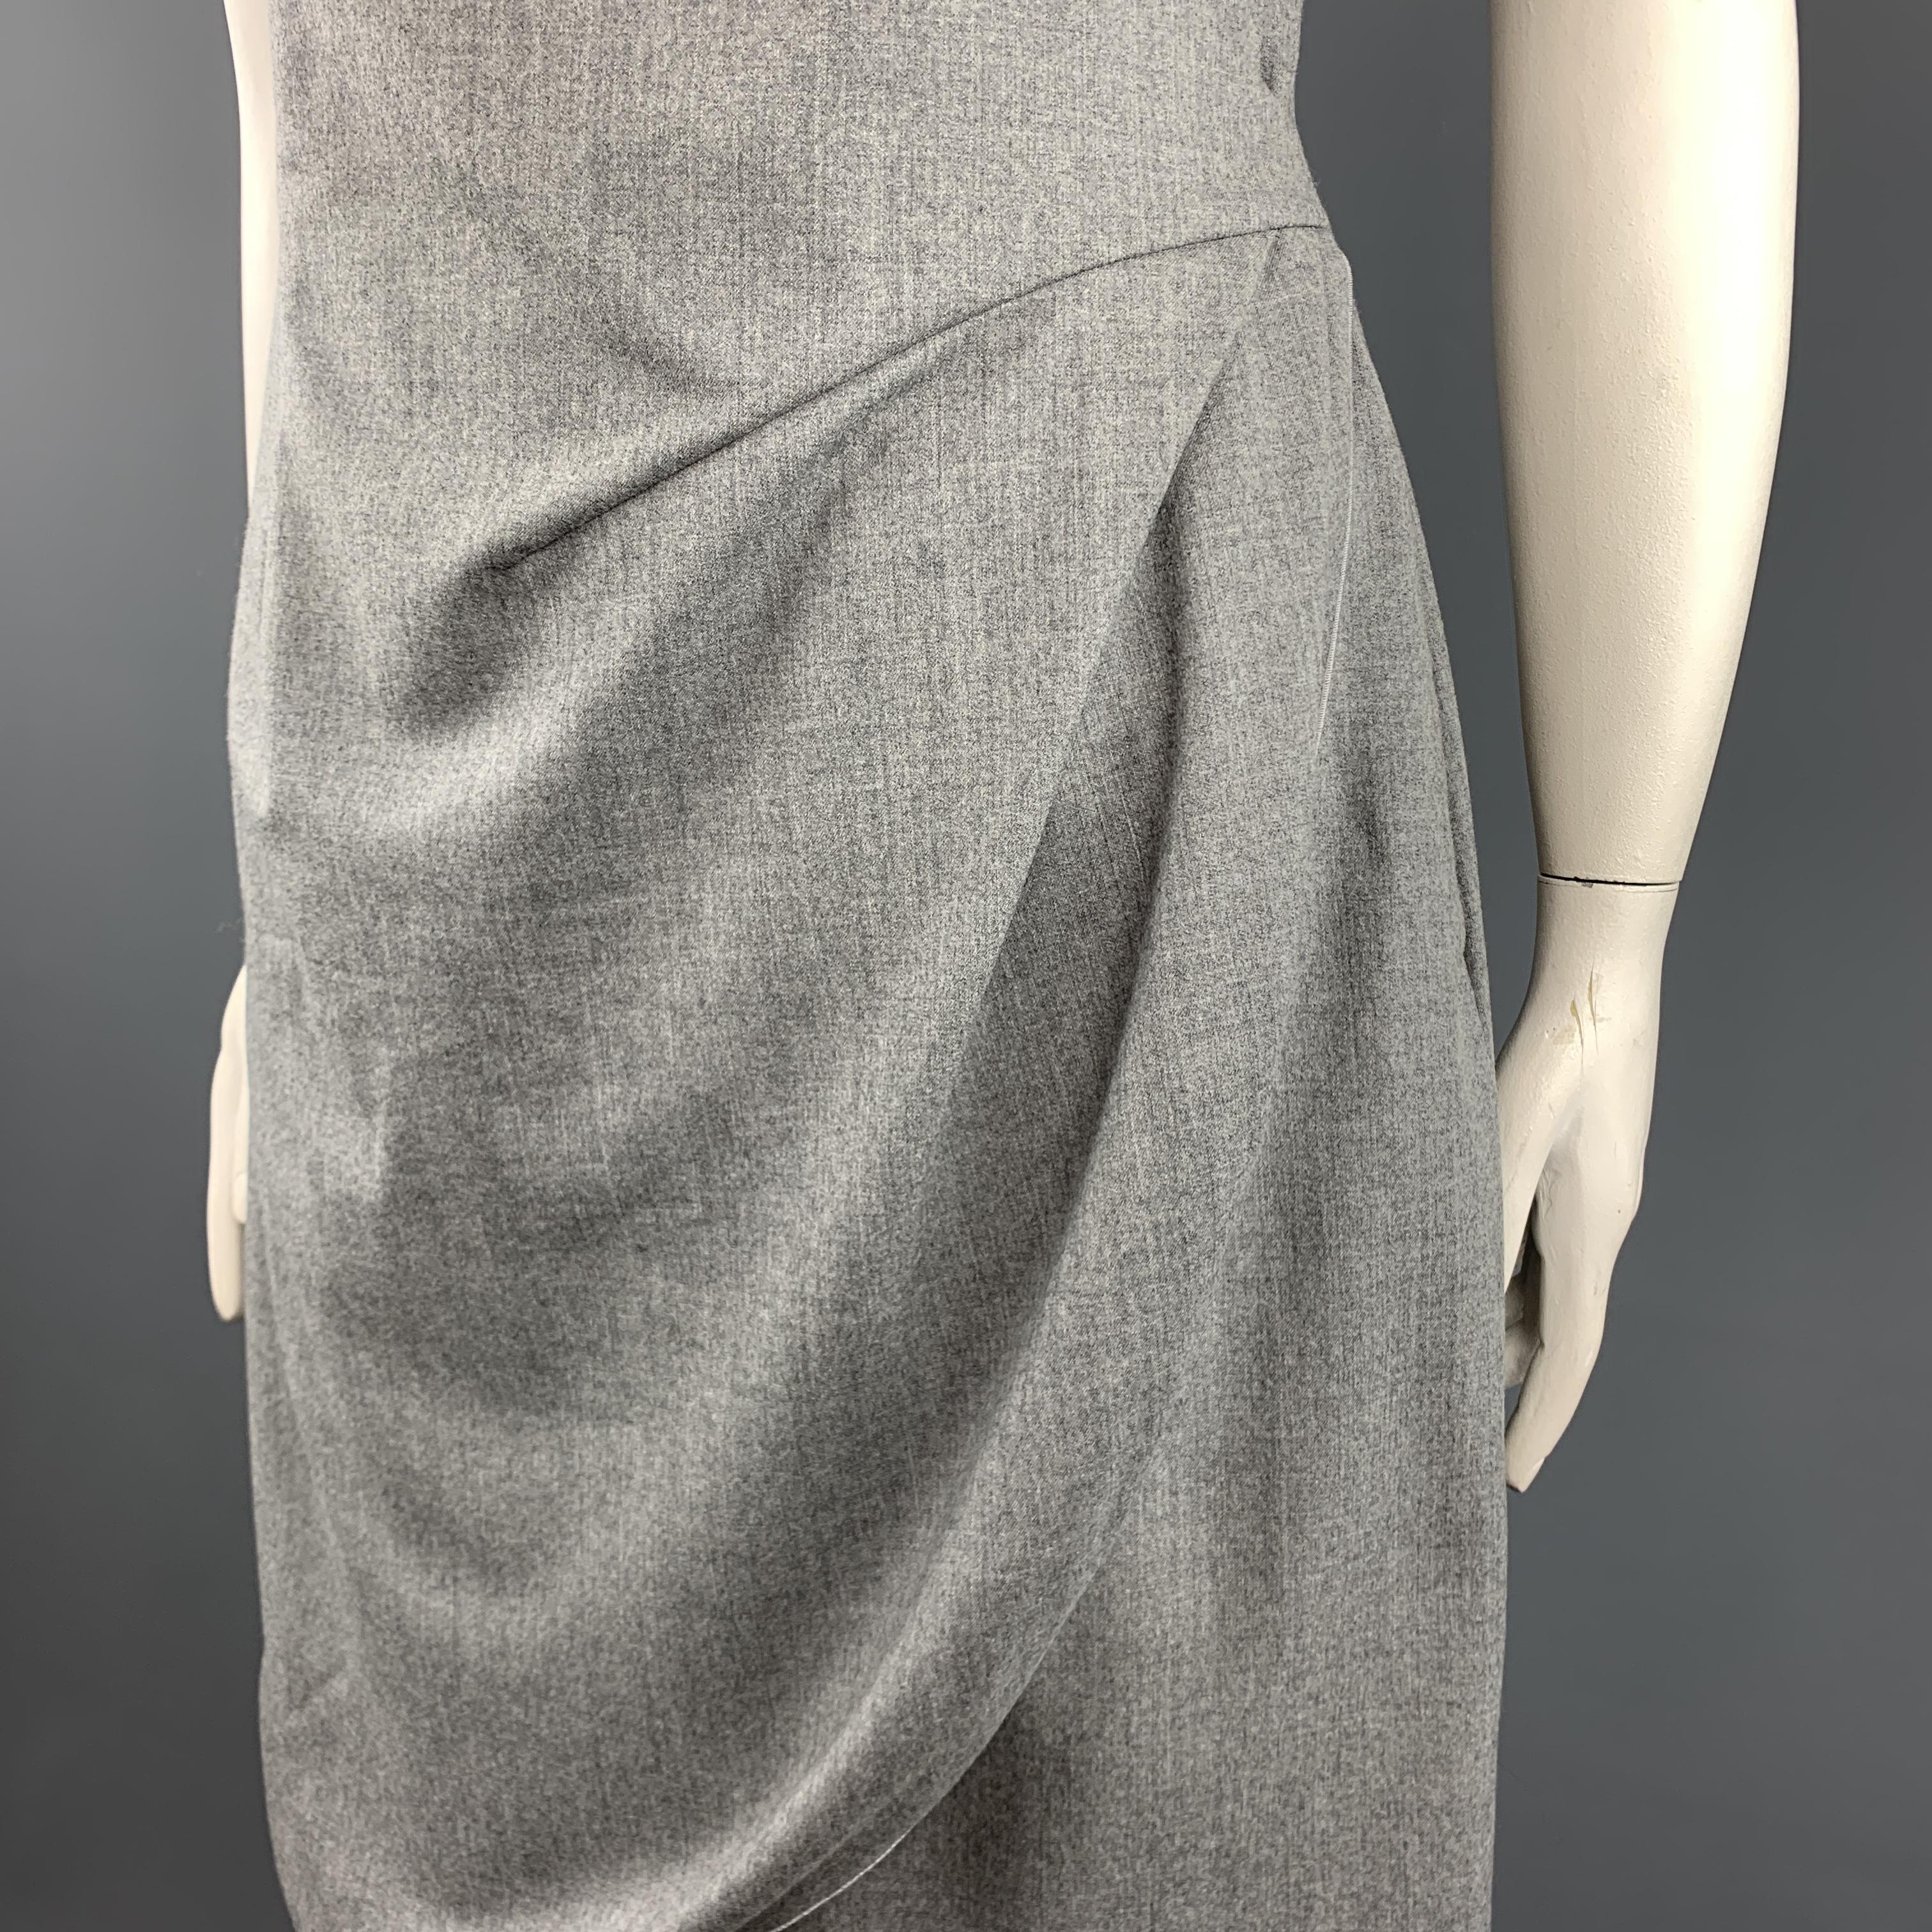 GIORGIO ARMANI sleeveless shift dress comes in light heather gray stretch wool with a round neckline and asymmetrical mock wrap, draped overlay. Made in Italy.

Excellent Pre-Owned Condition.
Marked: IT 46

Measurements:

l	Shoulder: 13 in.
l	Bust: